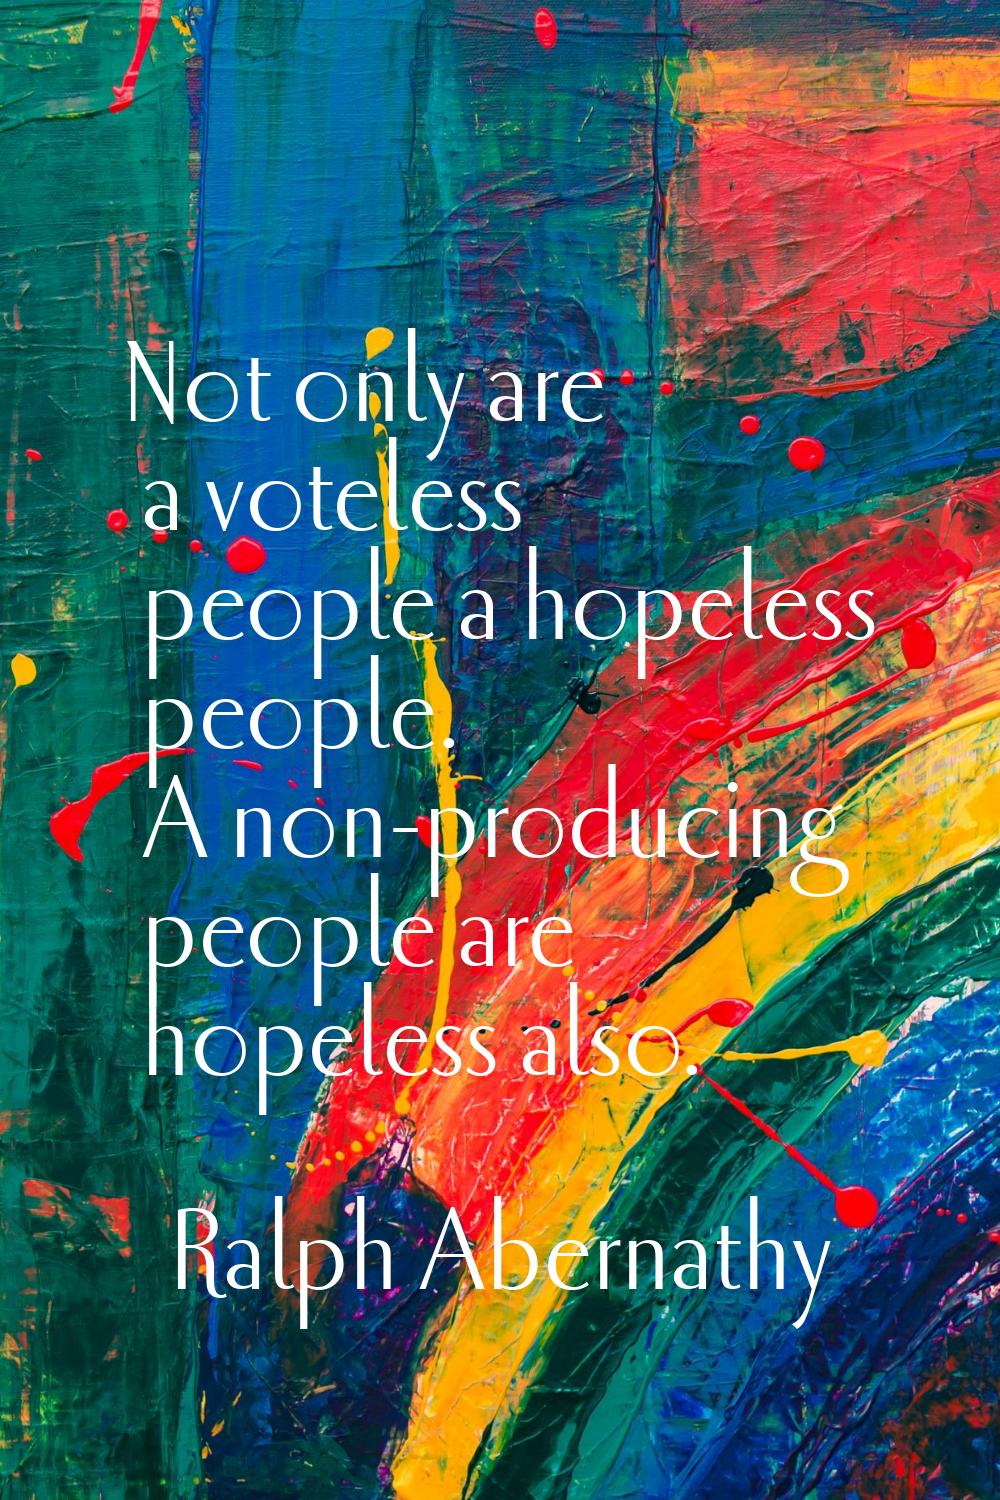 Not only are a voteless people a hopeless people. A non-producing people are hopeless also.